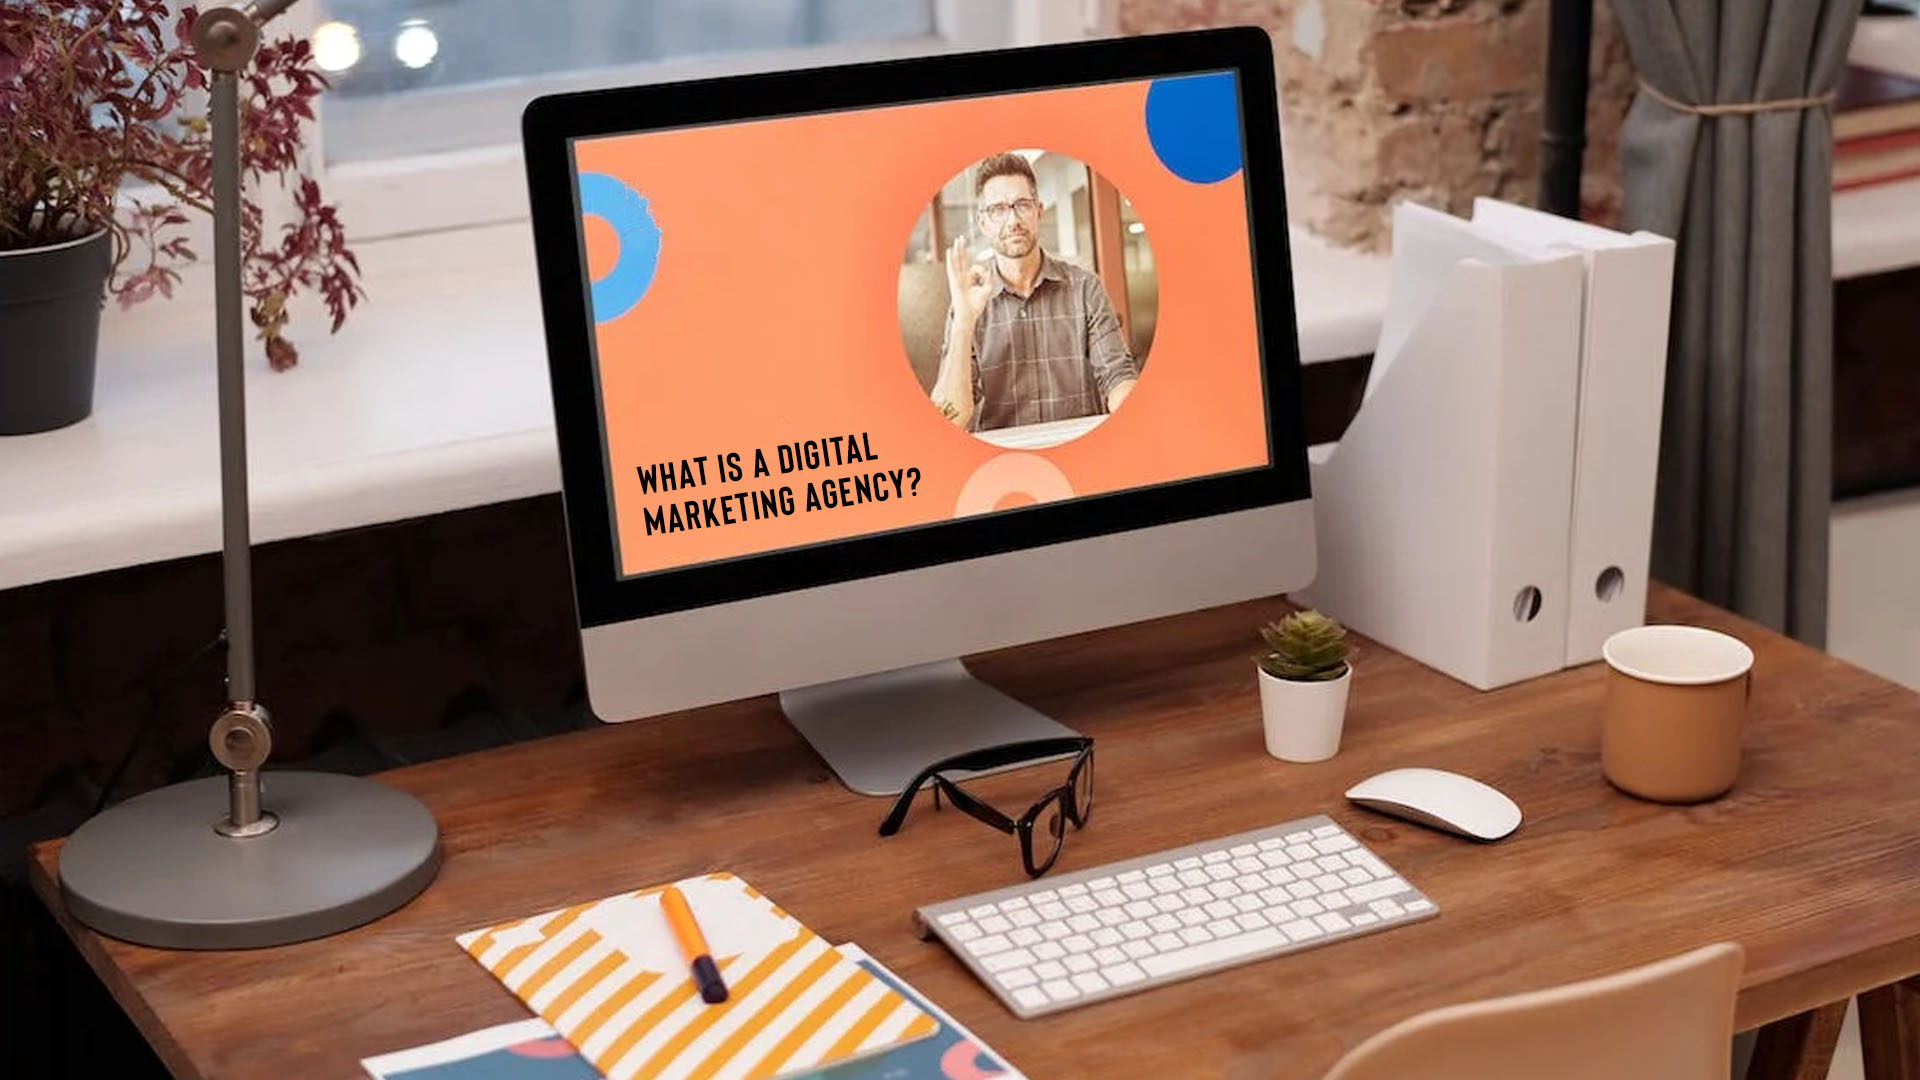 What is a digital marketing agency?